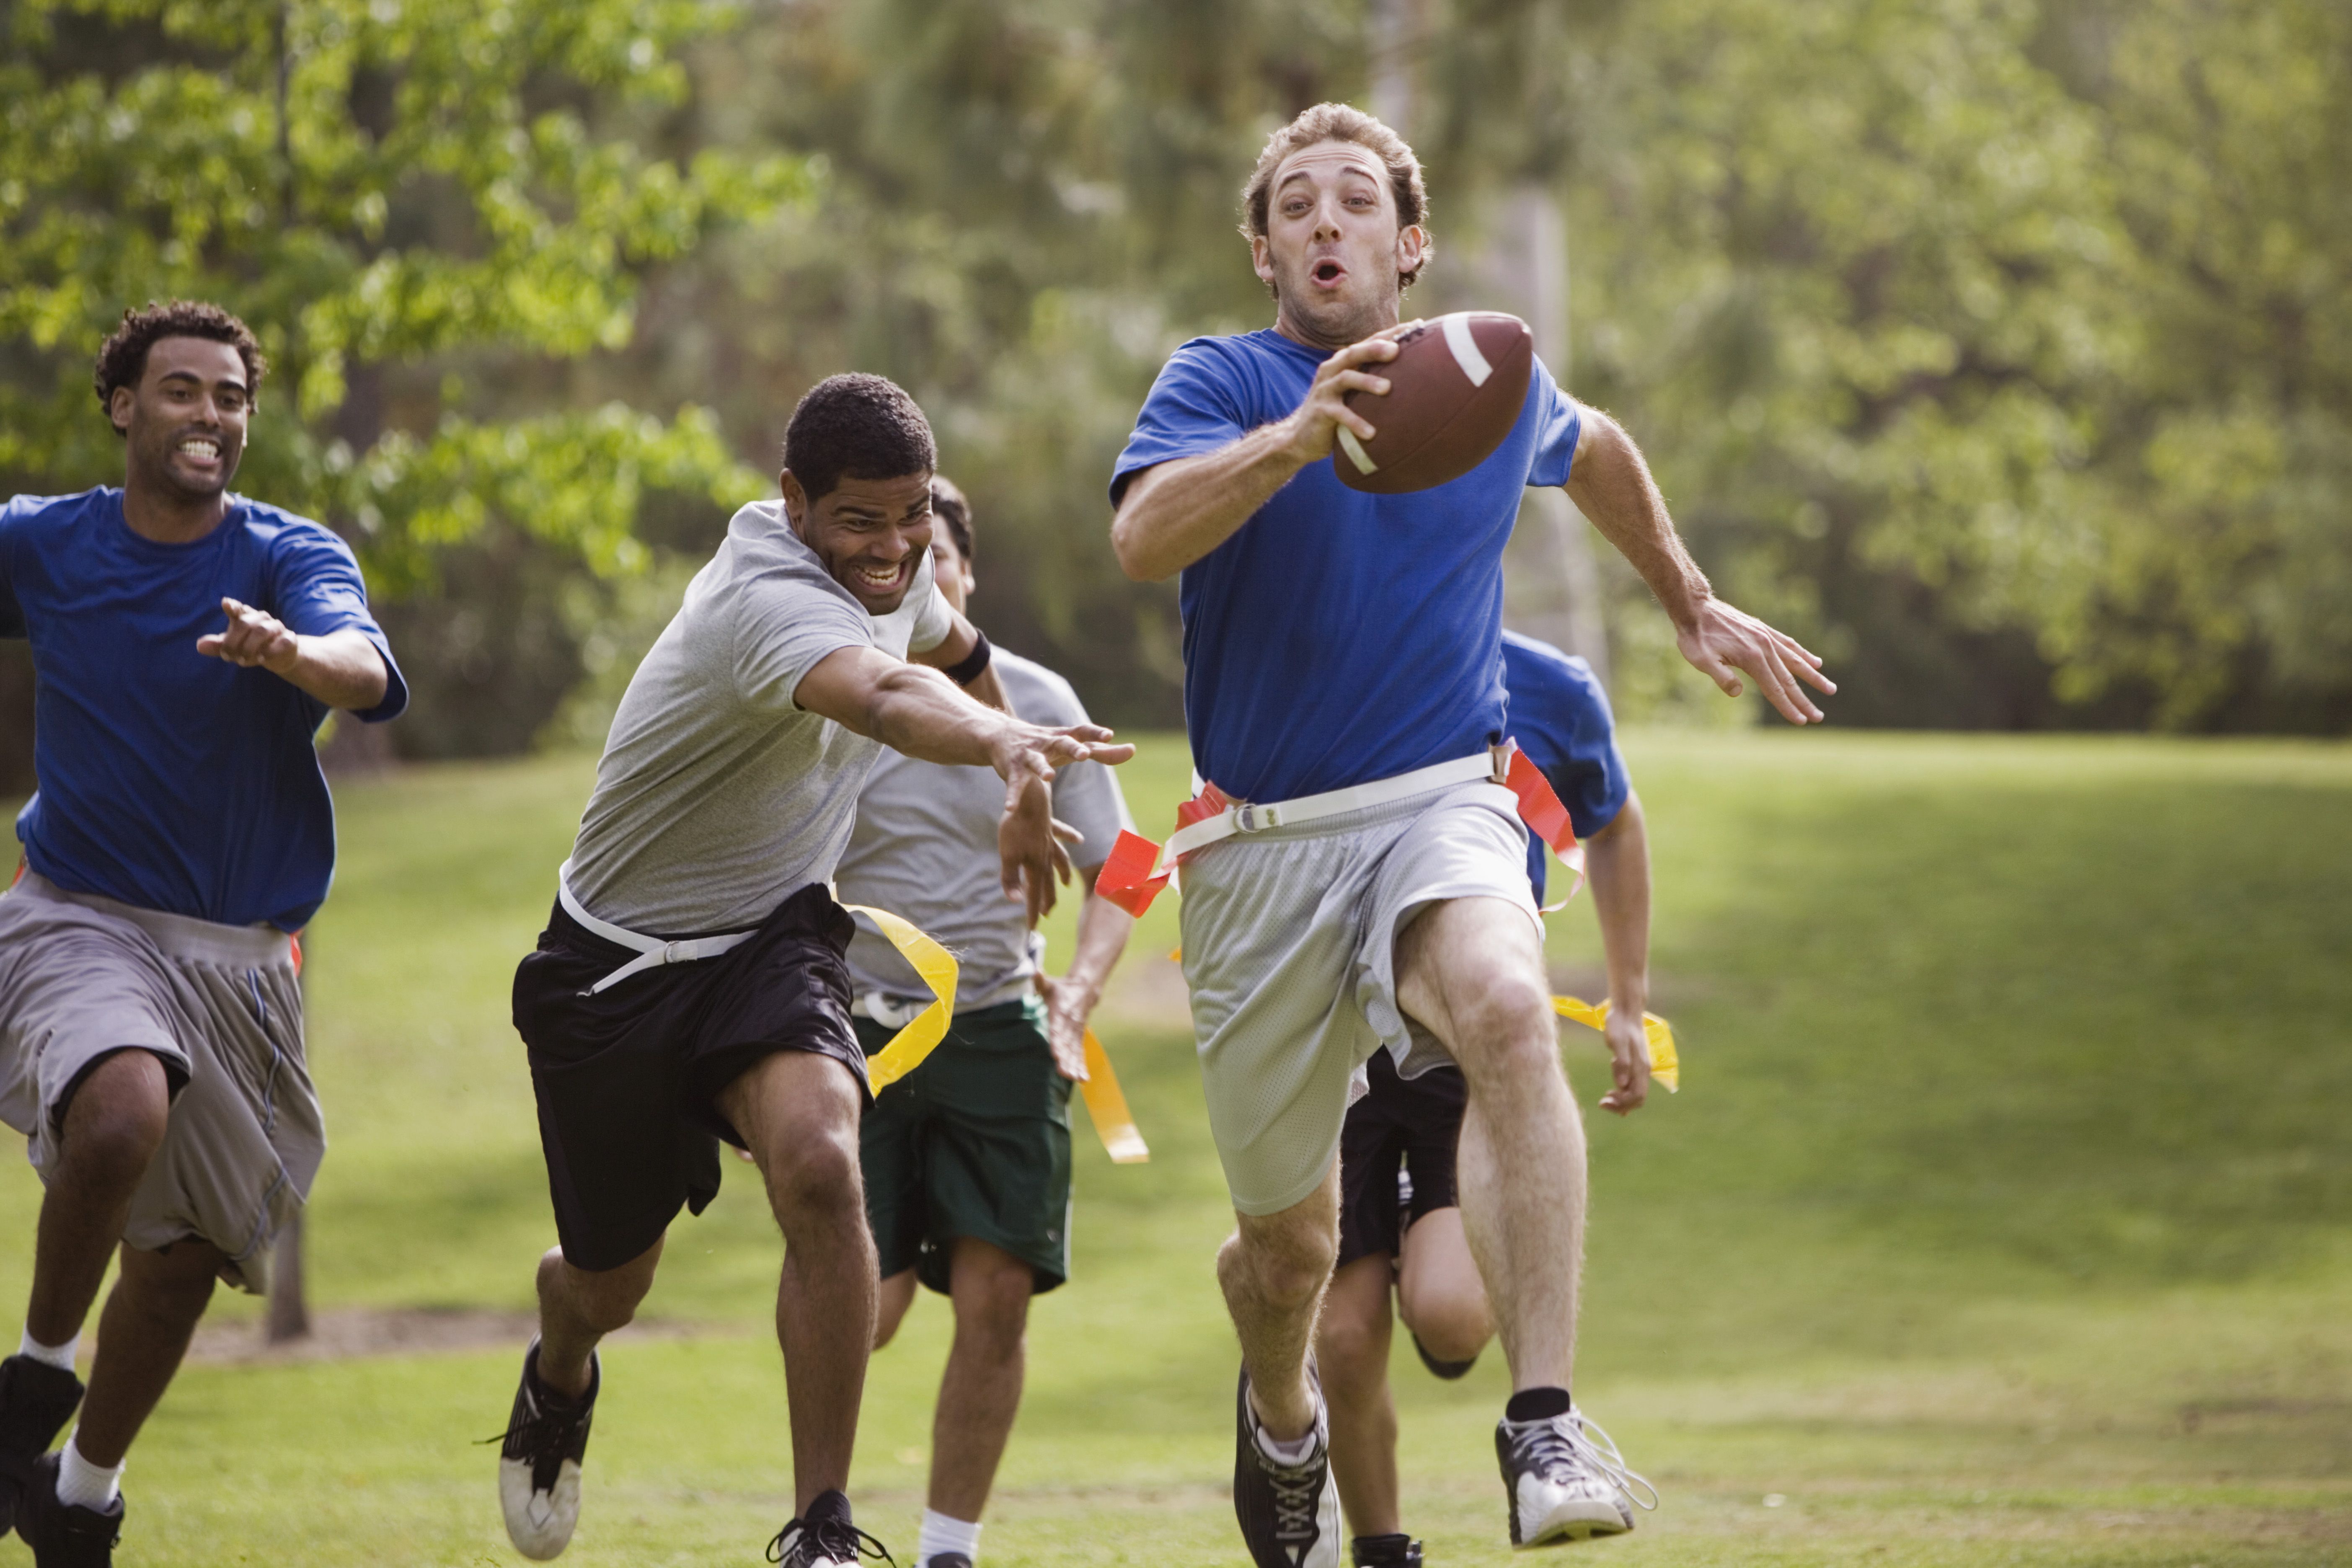 Flag Tag • Physical Education Games